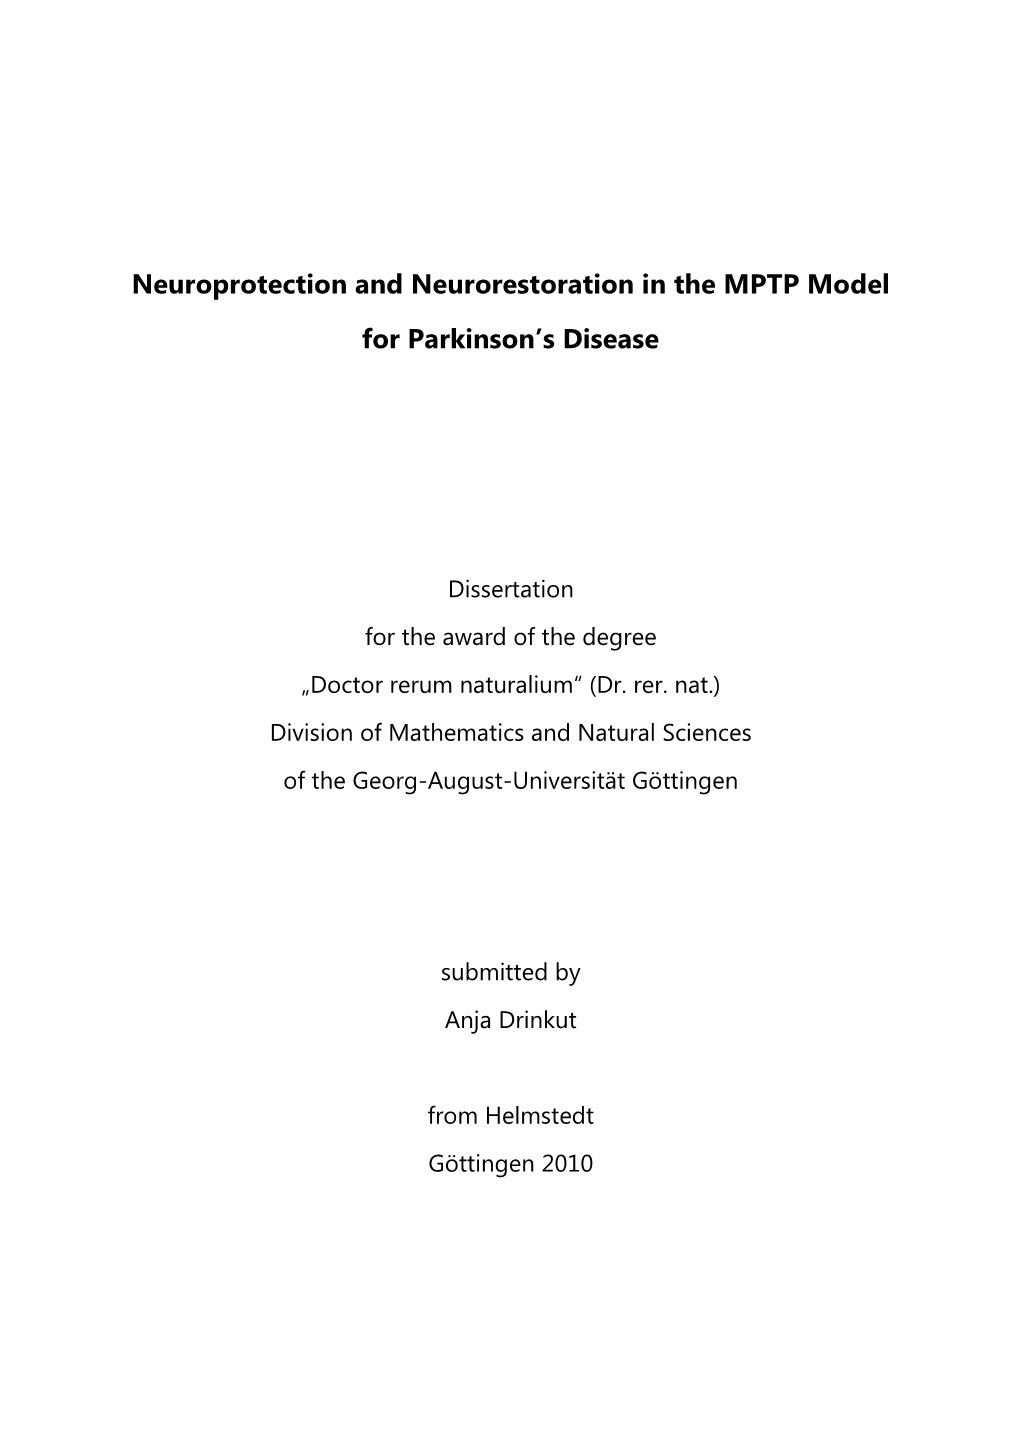 Neuroprotection and Neurorestoration in the MPTP Model for Parkinson's Disease